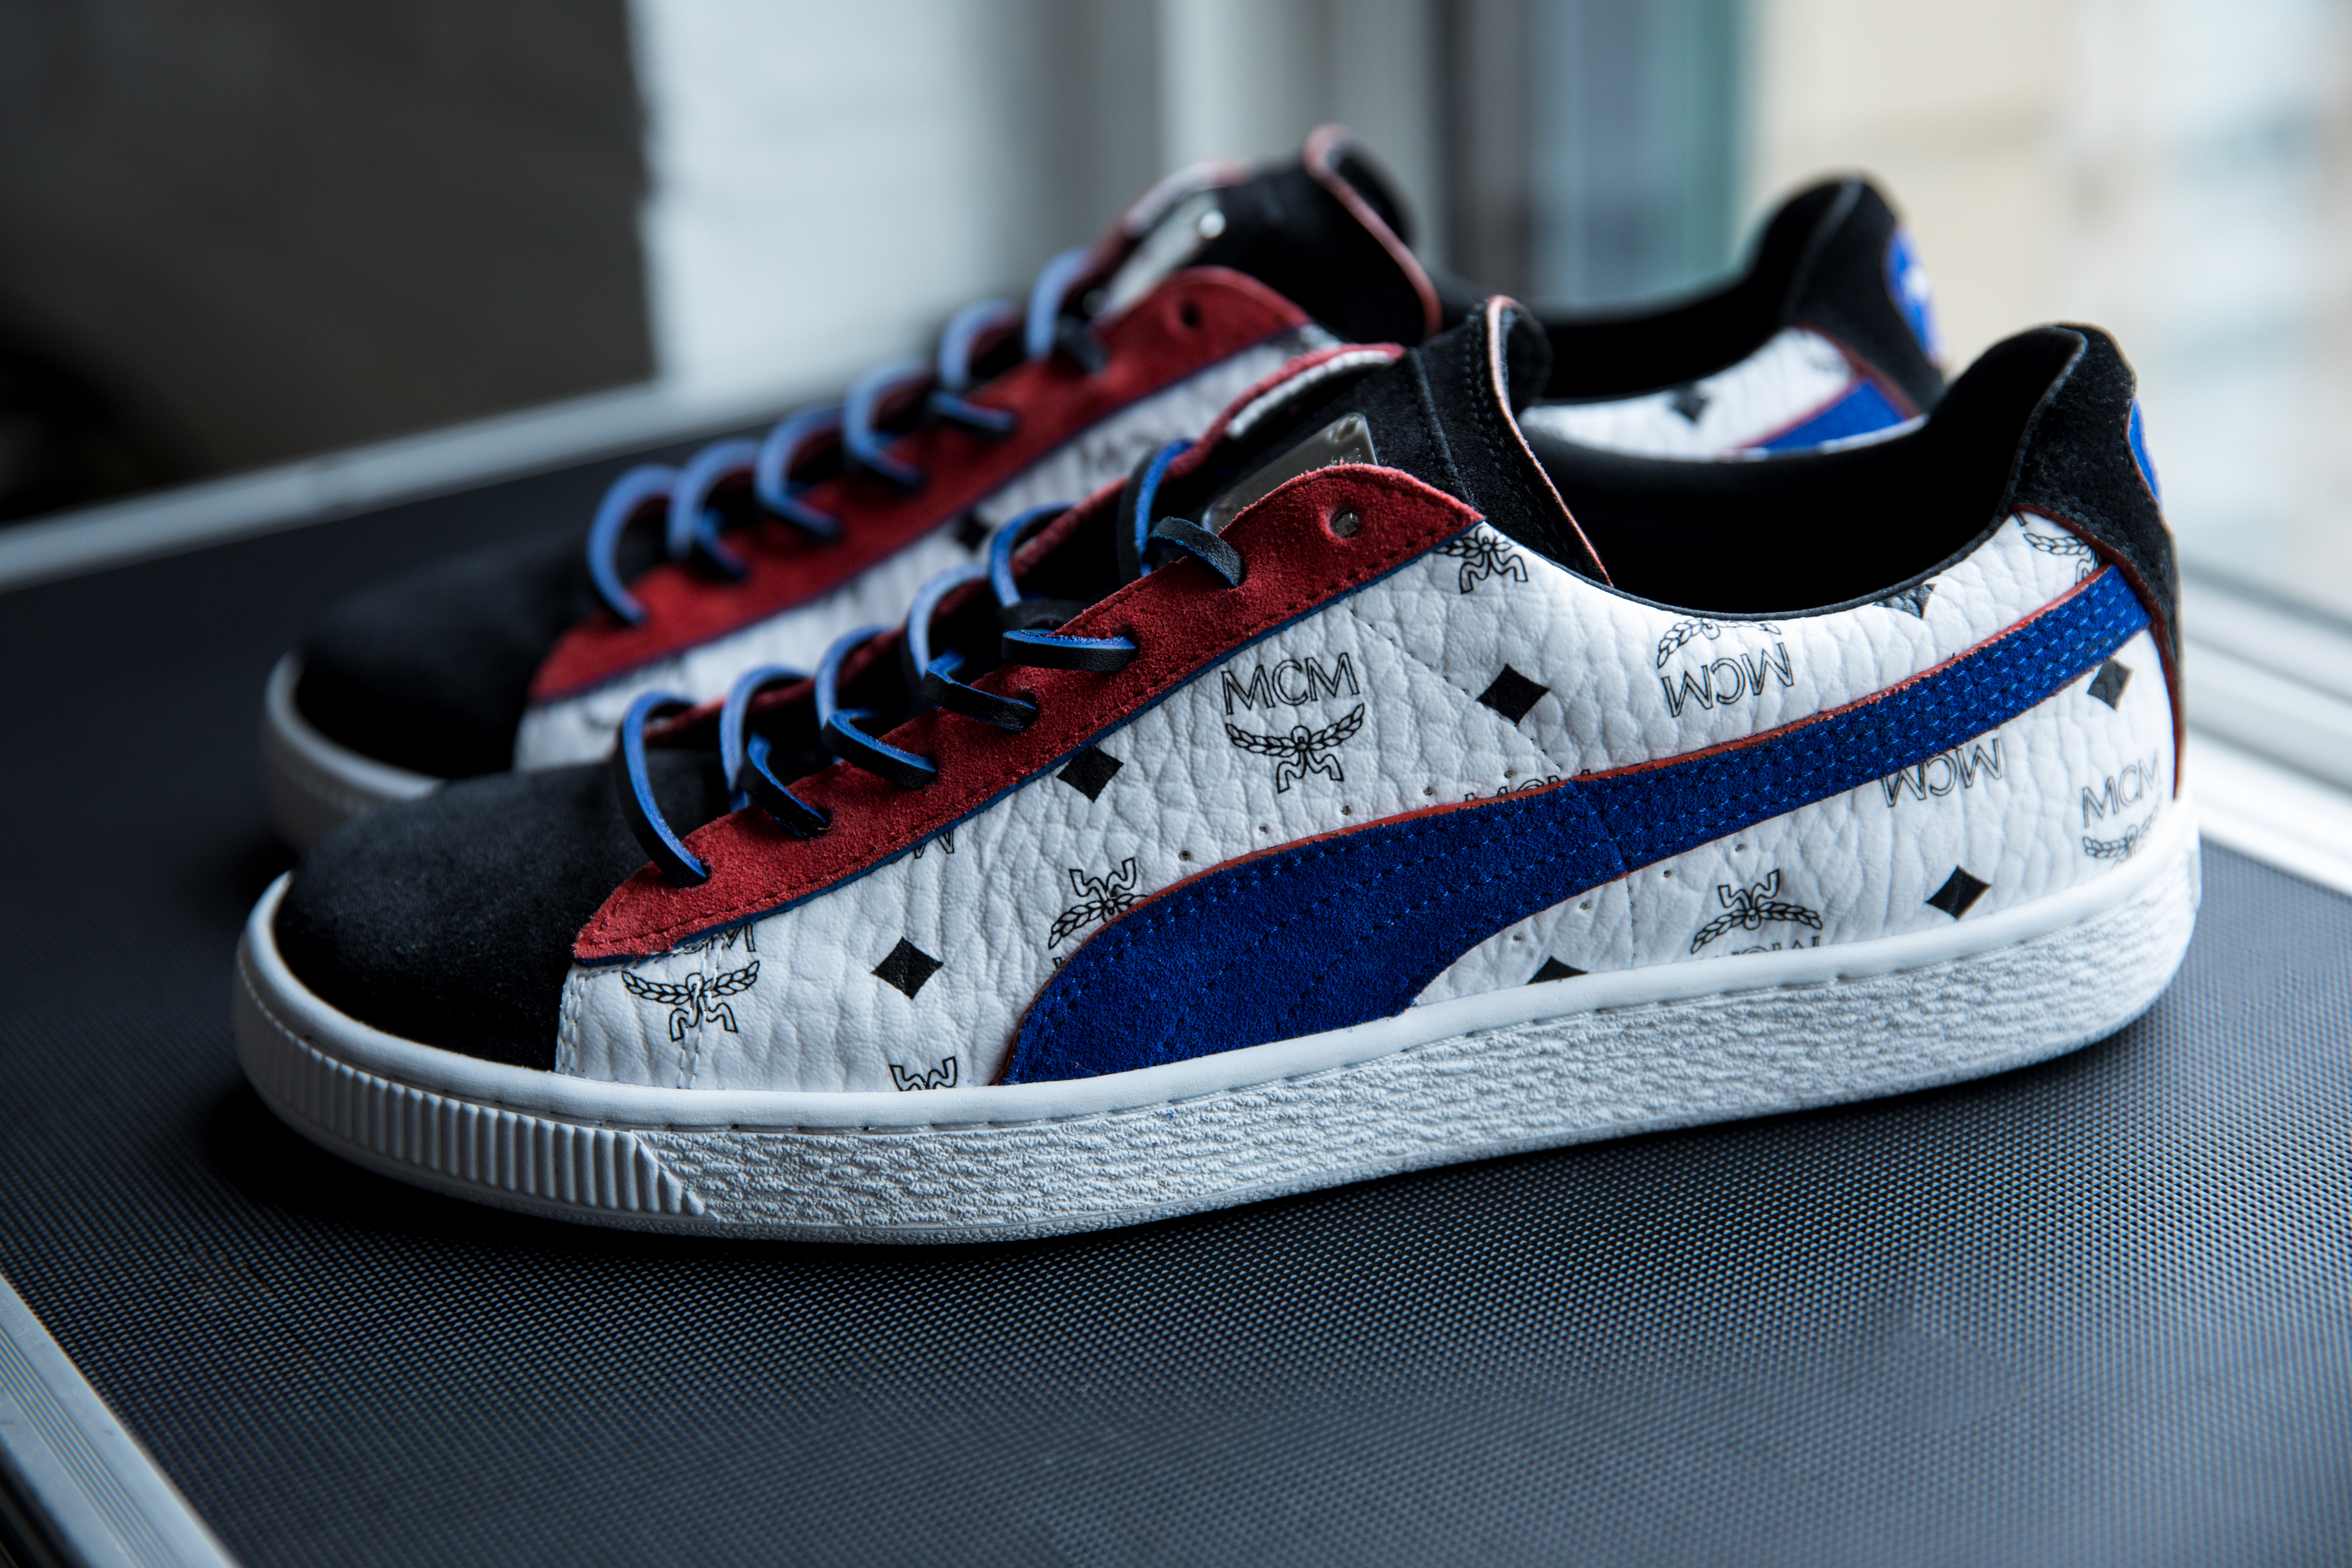 MCM Lends Its Iconic Monogram to Classic PUMA Silhouettes for an ...